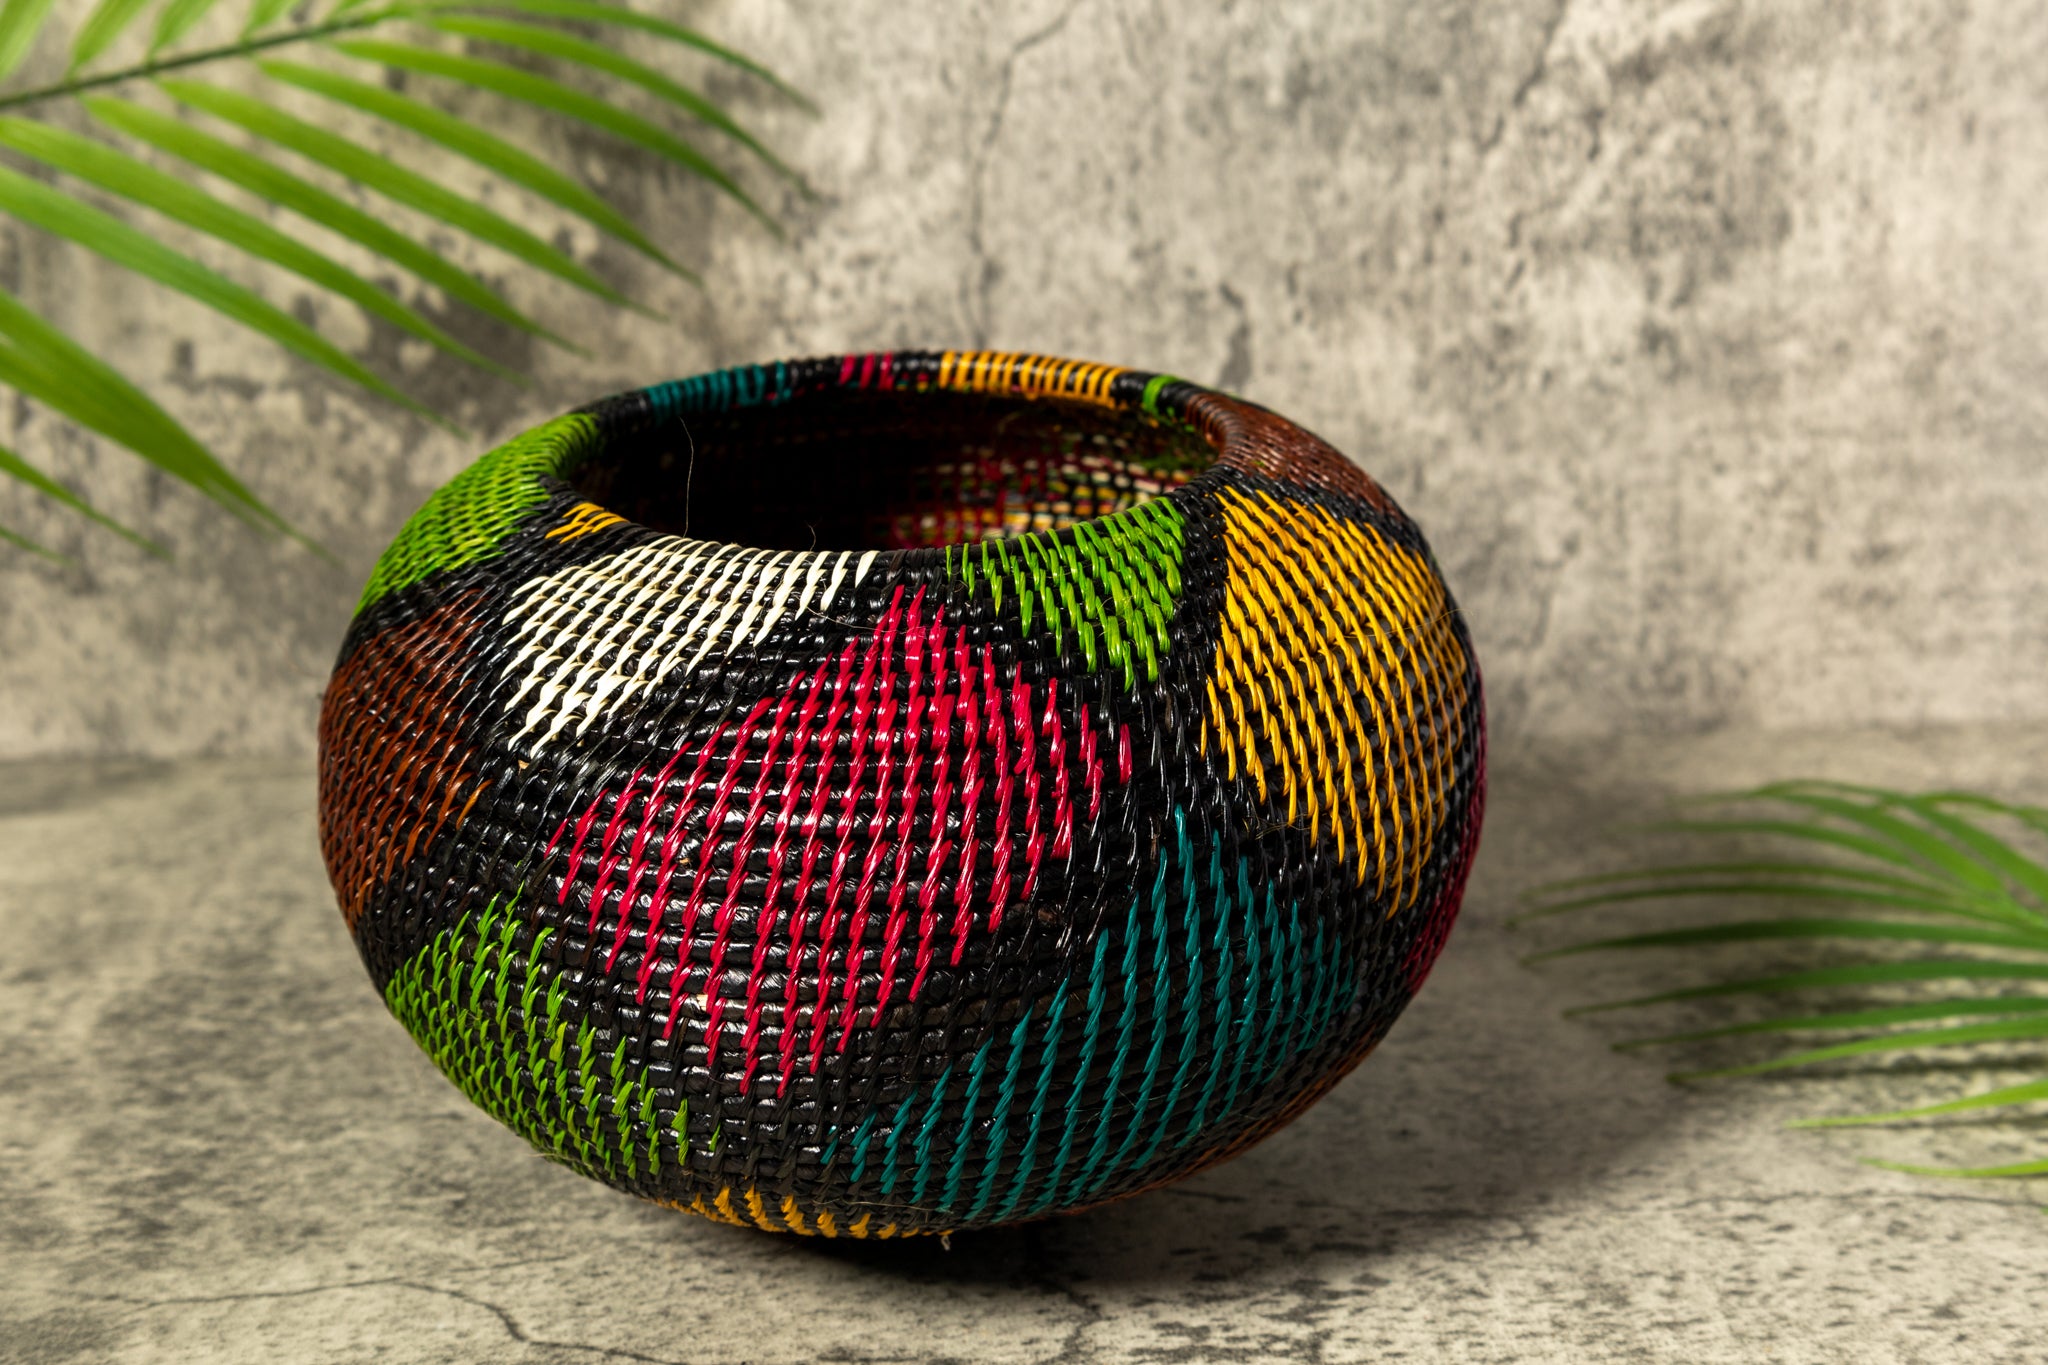 Rainbow Colors Fish Net Woven Basket With Top